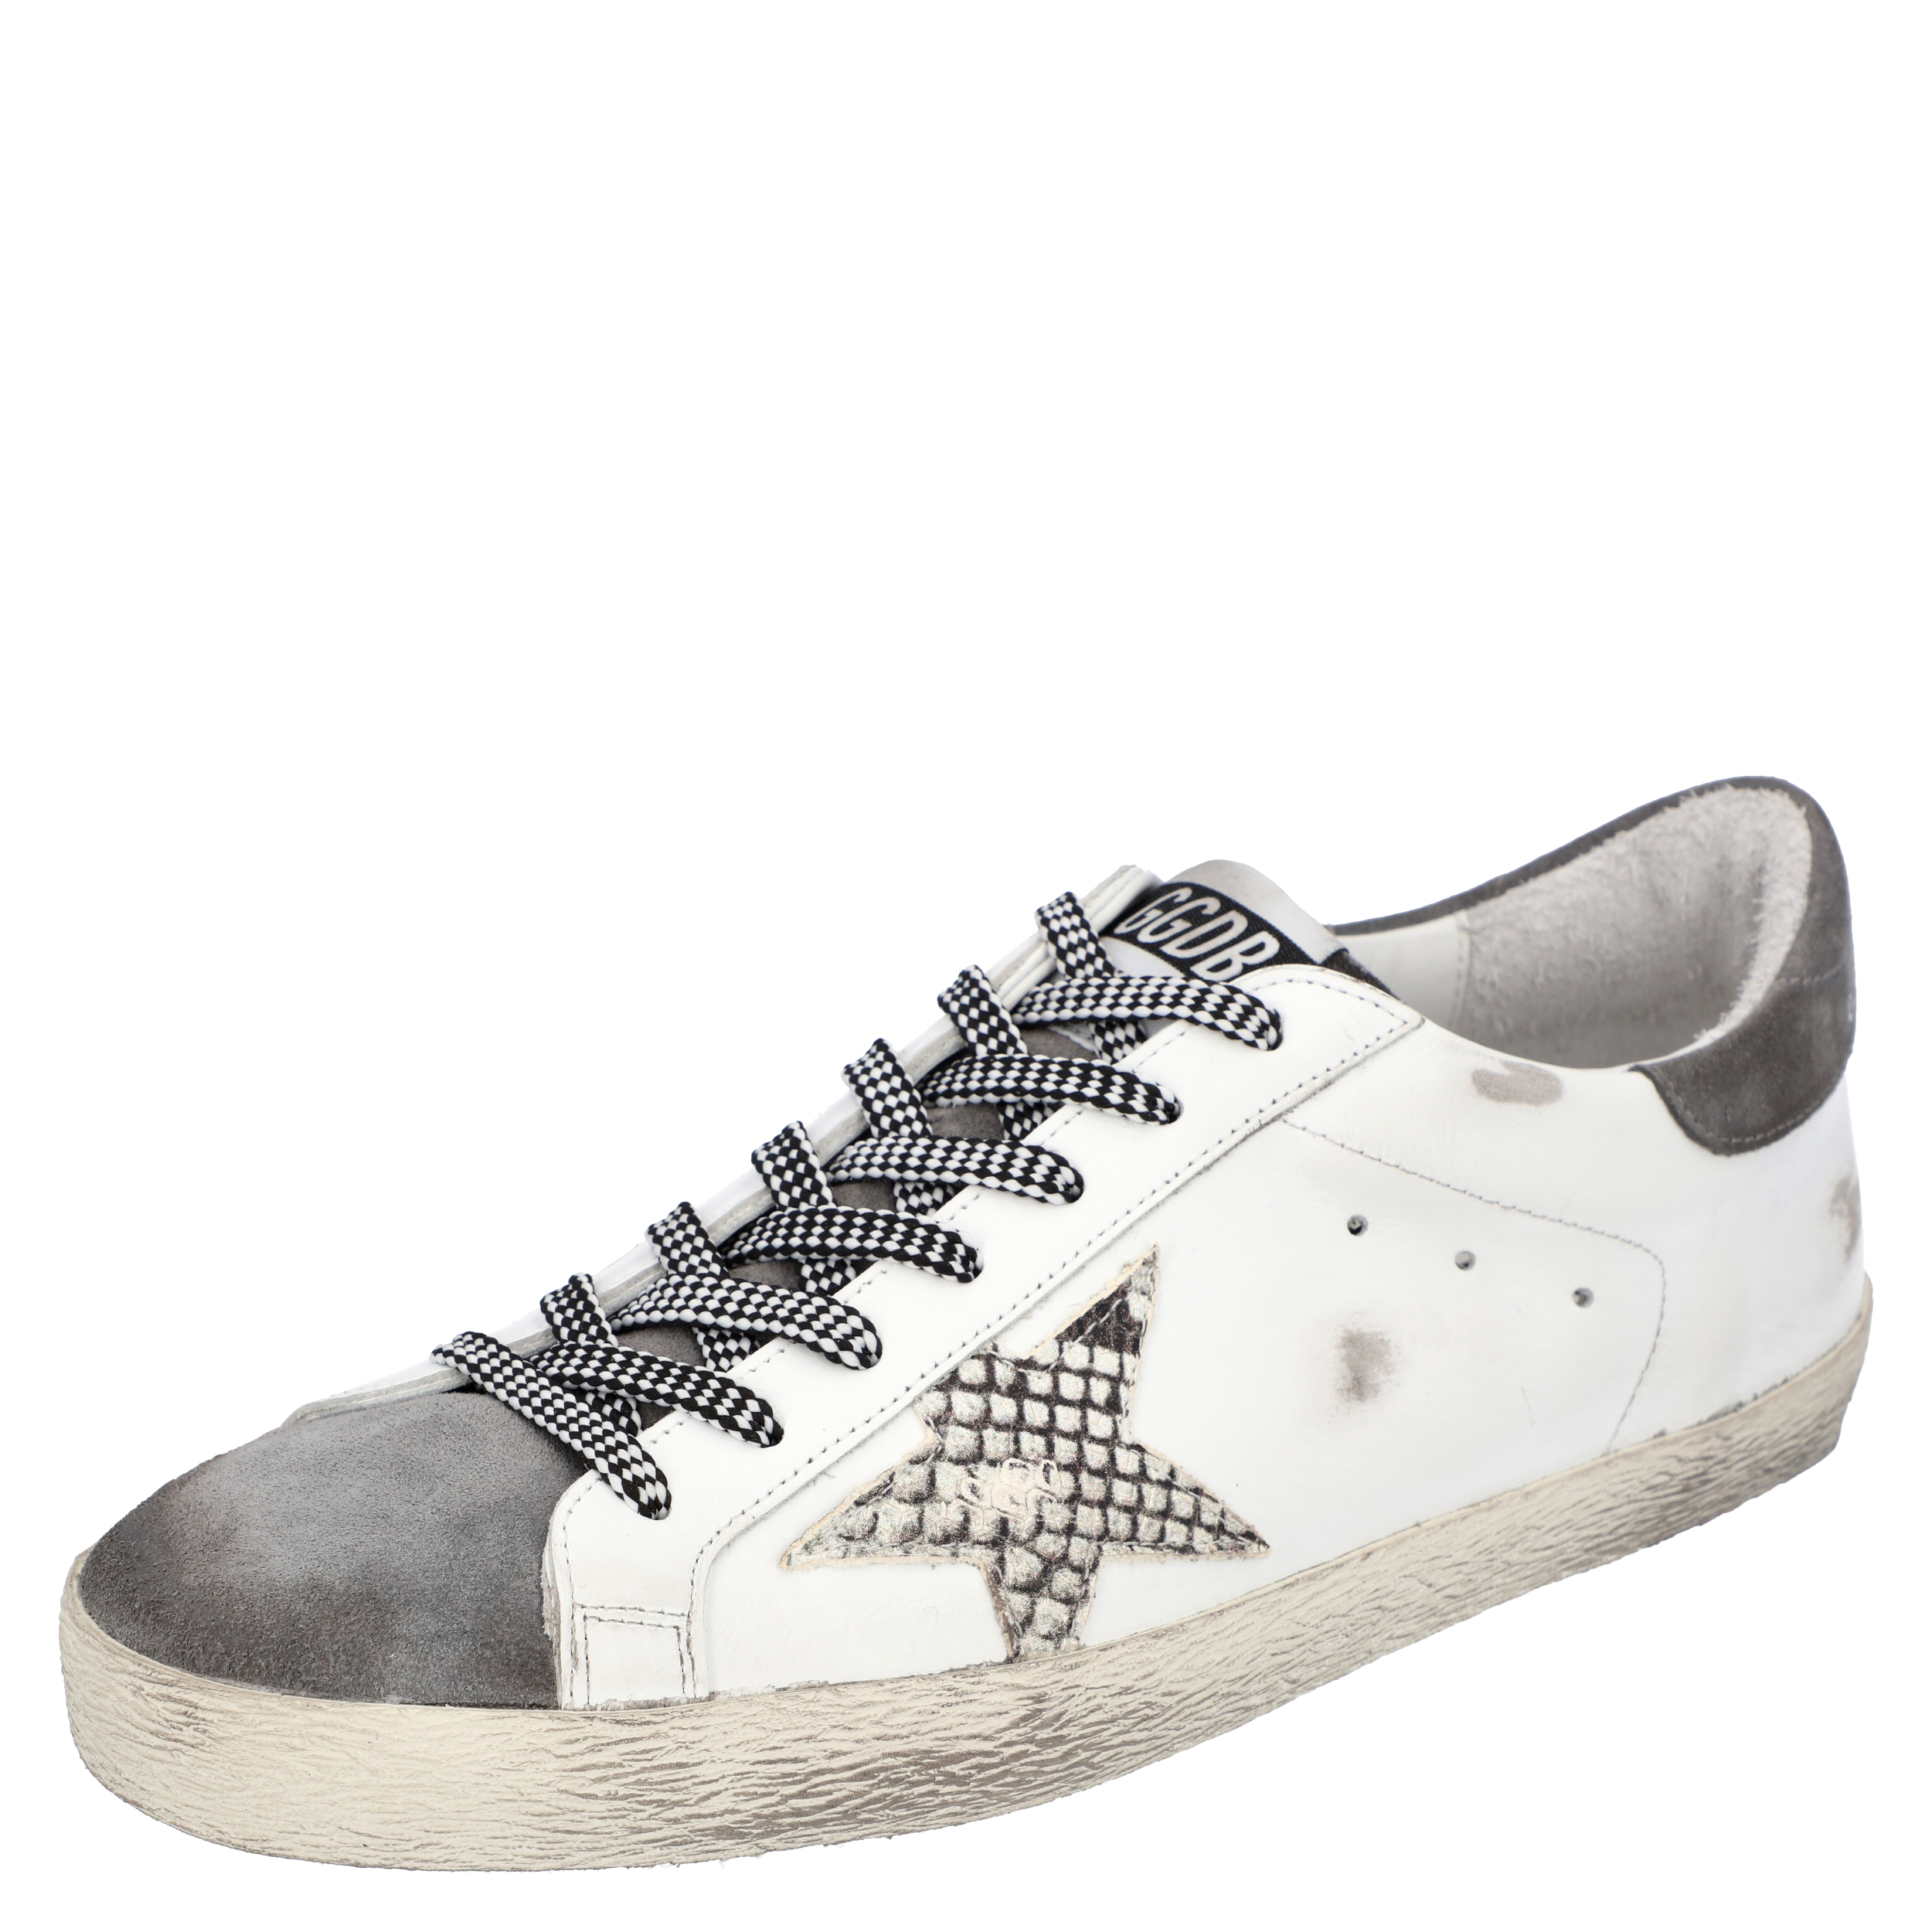 Golden Goose White/Grey Leather Superstar Sneakers Size EU 44